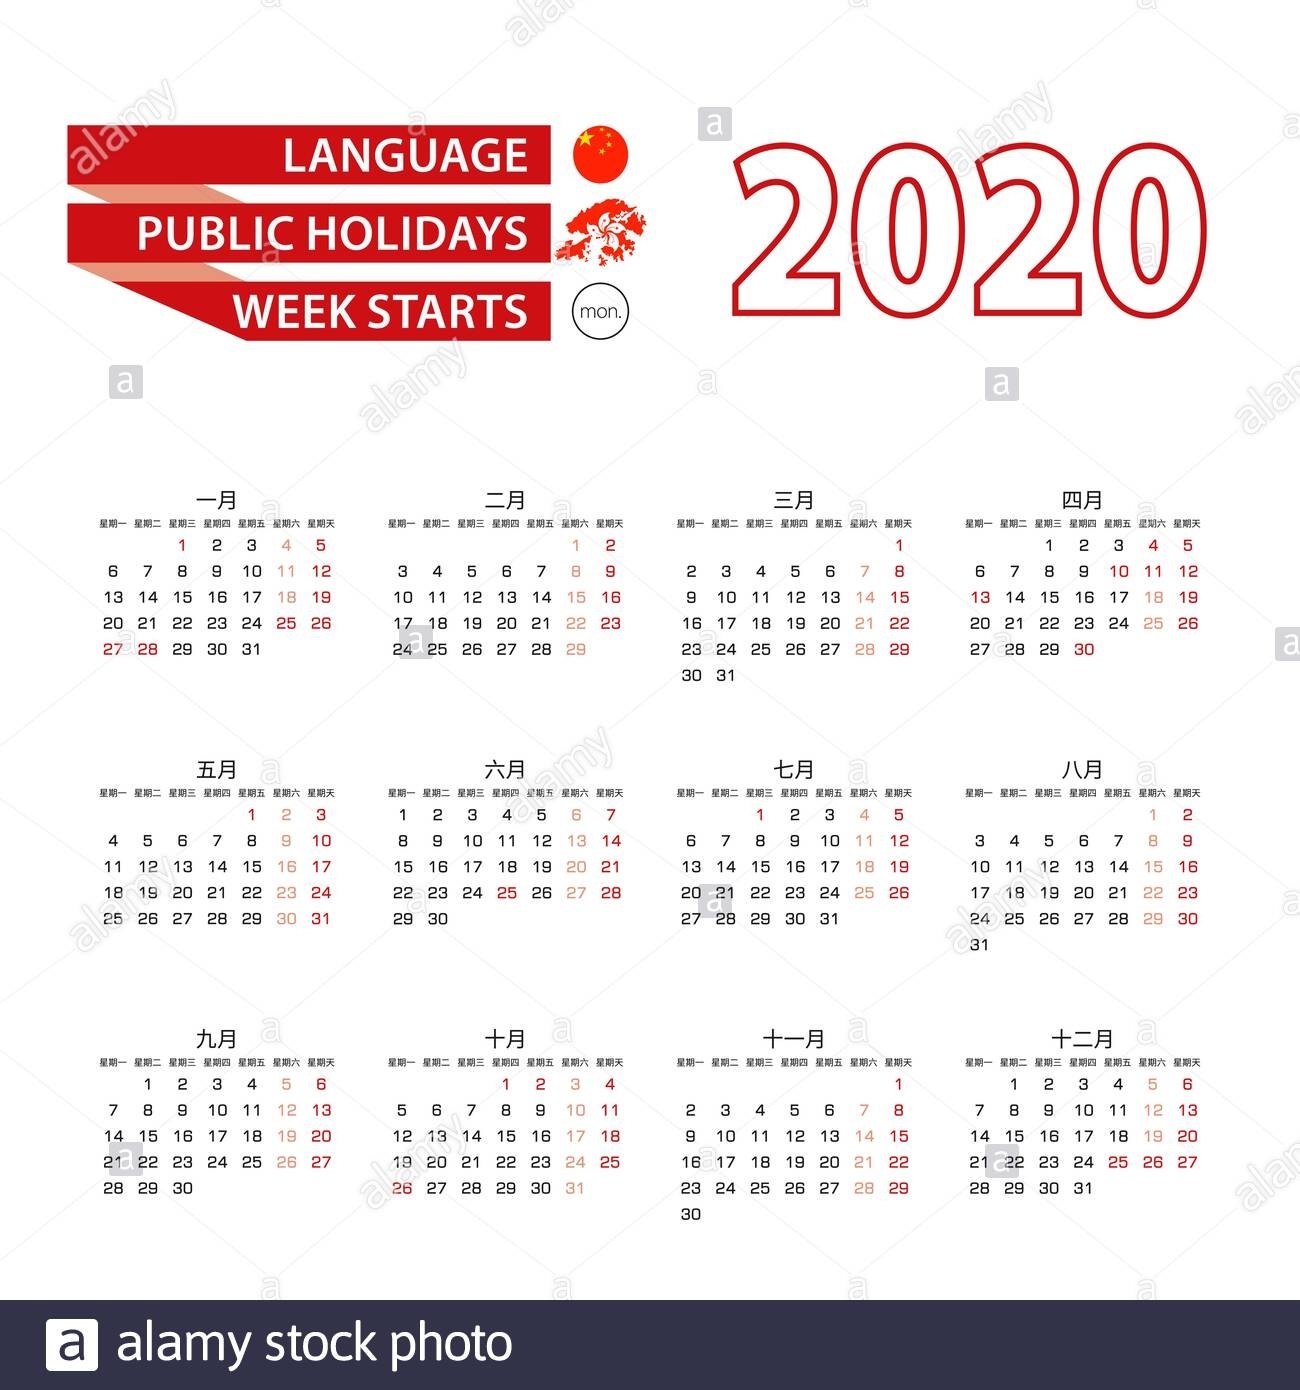 Calendar 2020 In Chinese Language With Public Holidays The